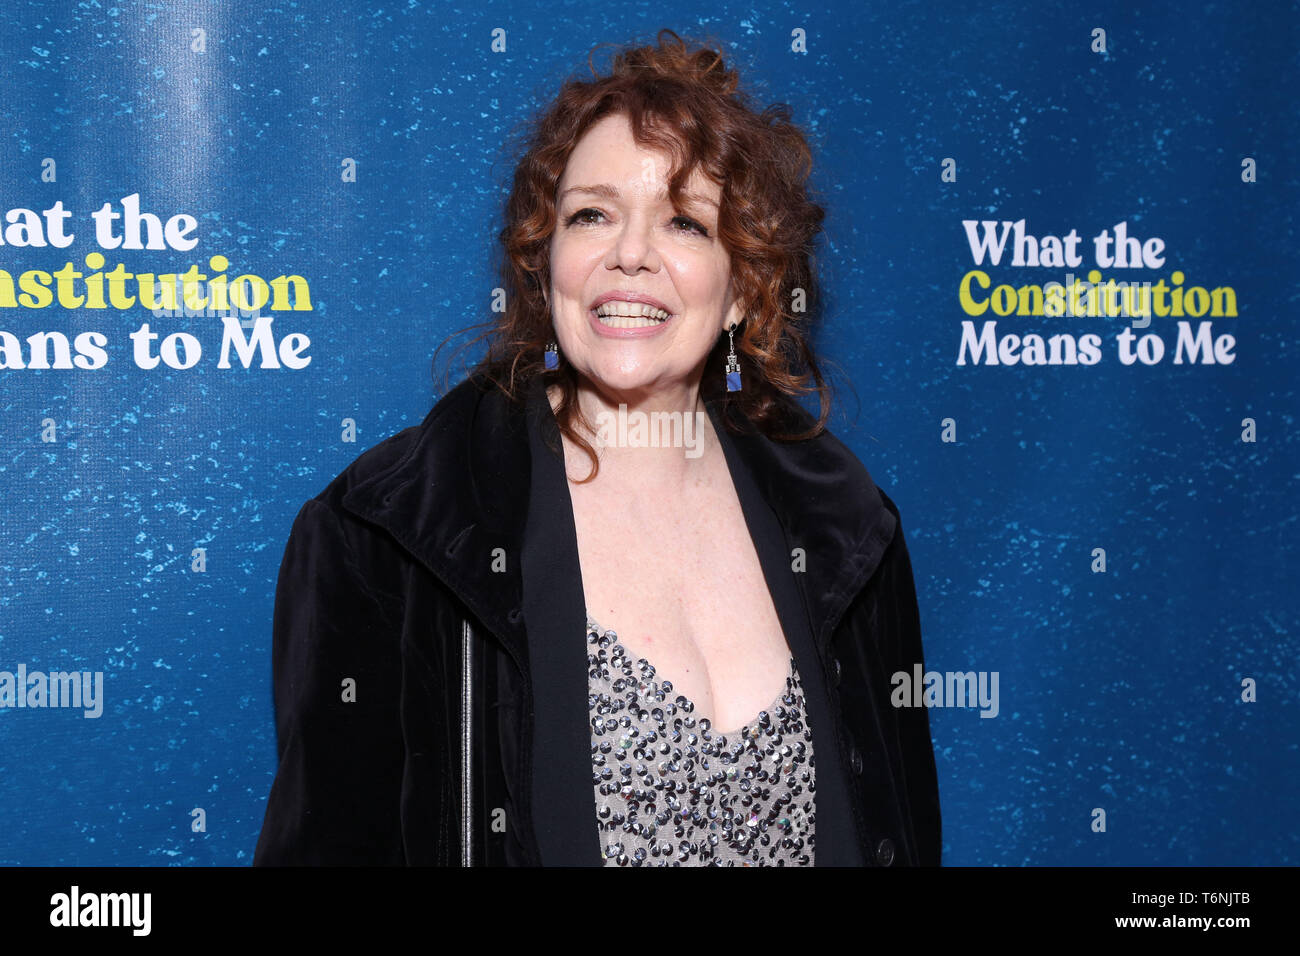 Opening night for What The Constitution Means To Me at the Helen Hayes Theatre - Arrivals.  Featuring: Deirdre O'Connell Where: New York, New York, United States When: 31 Mar 2019 Credit: Joseph Marzullo/WENN.com Stock Photo